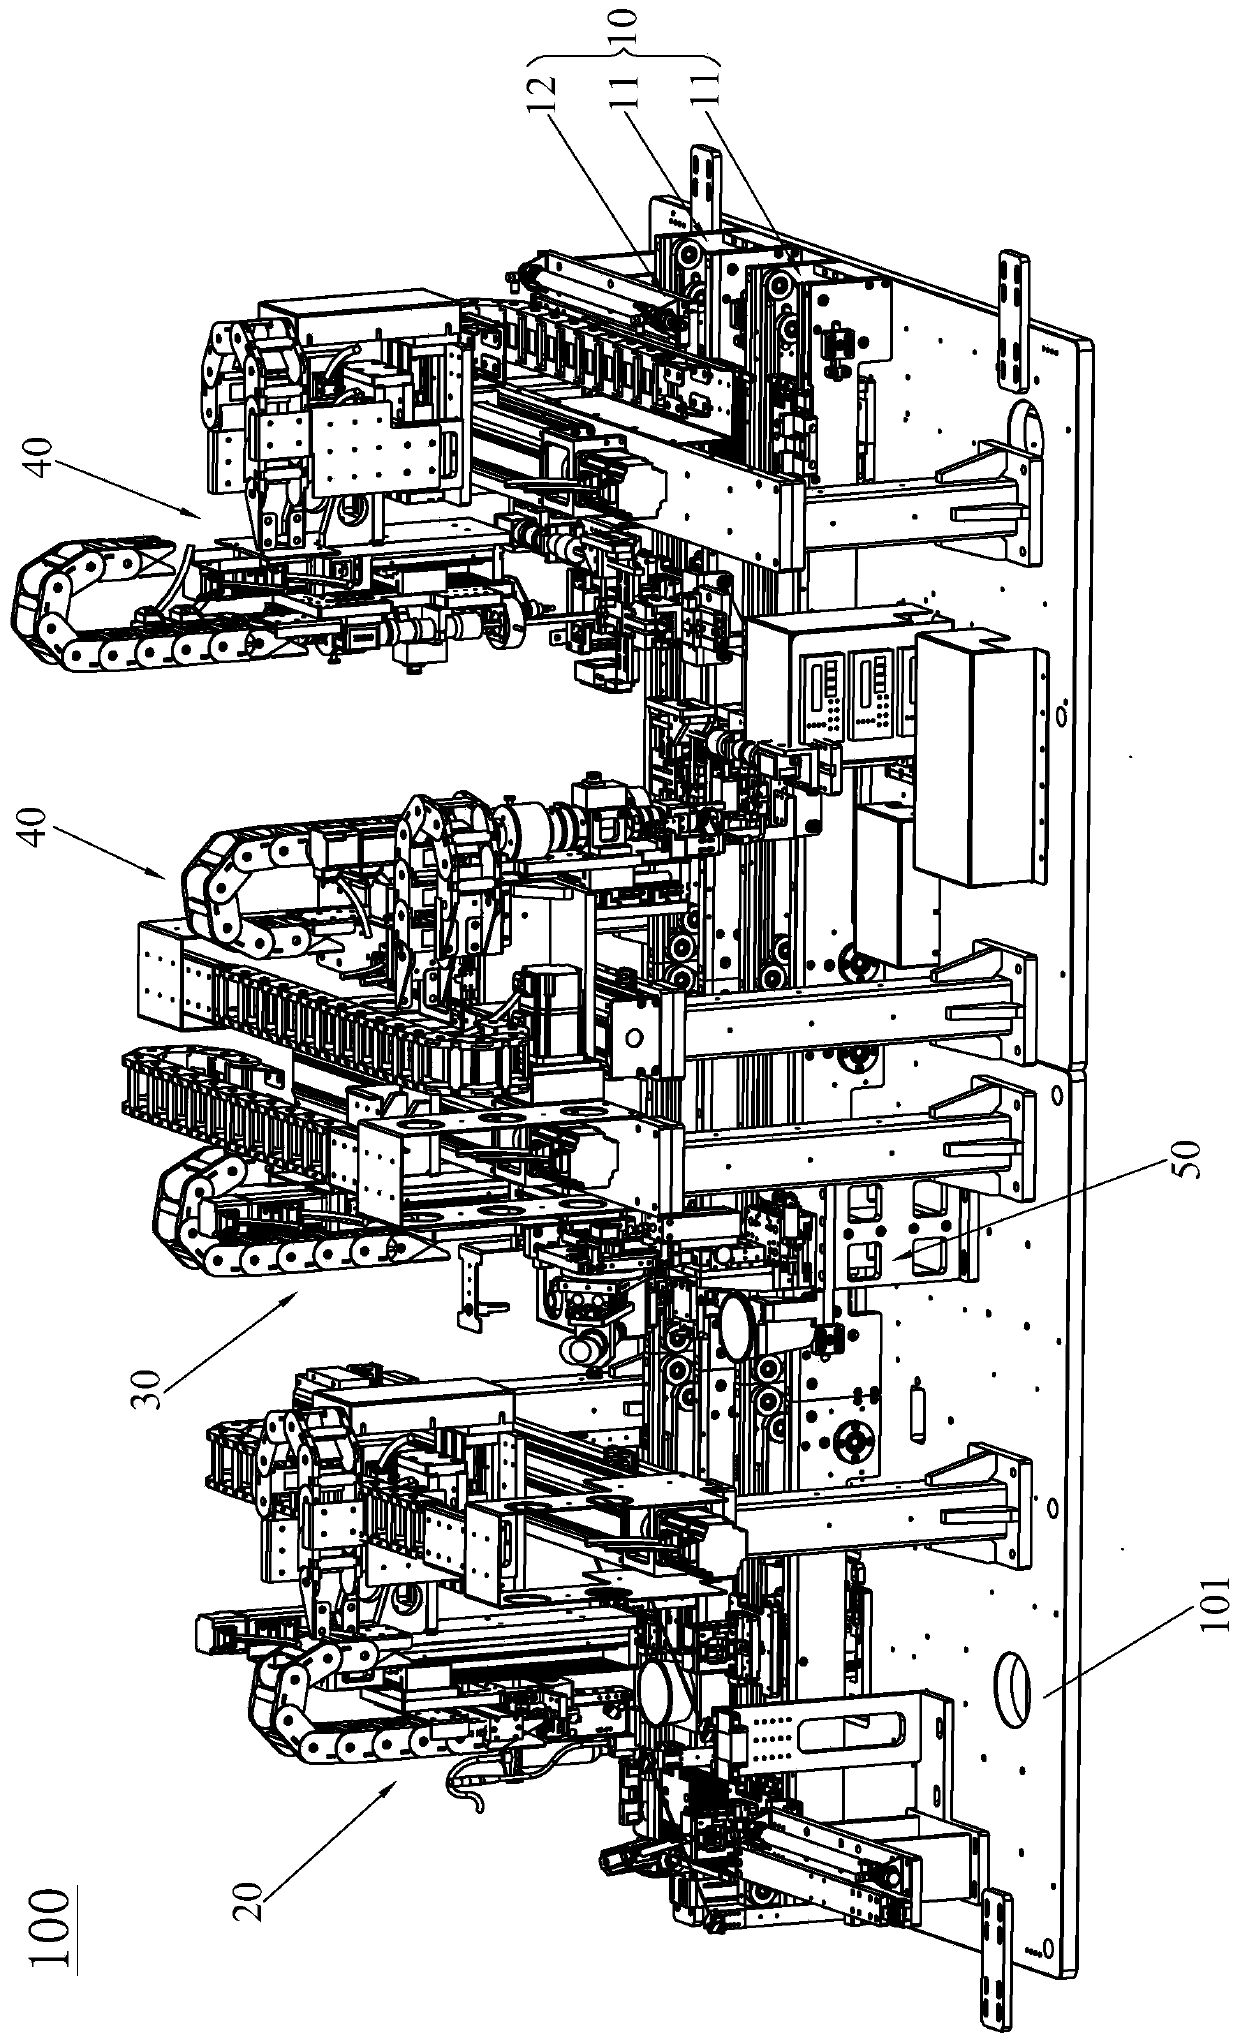 Automatic assembly alignment equipment